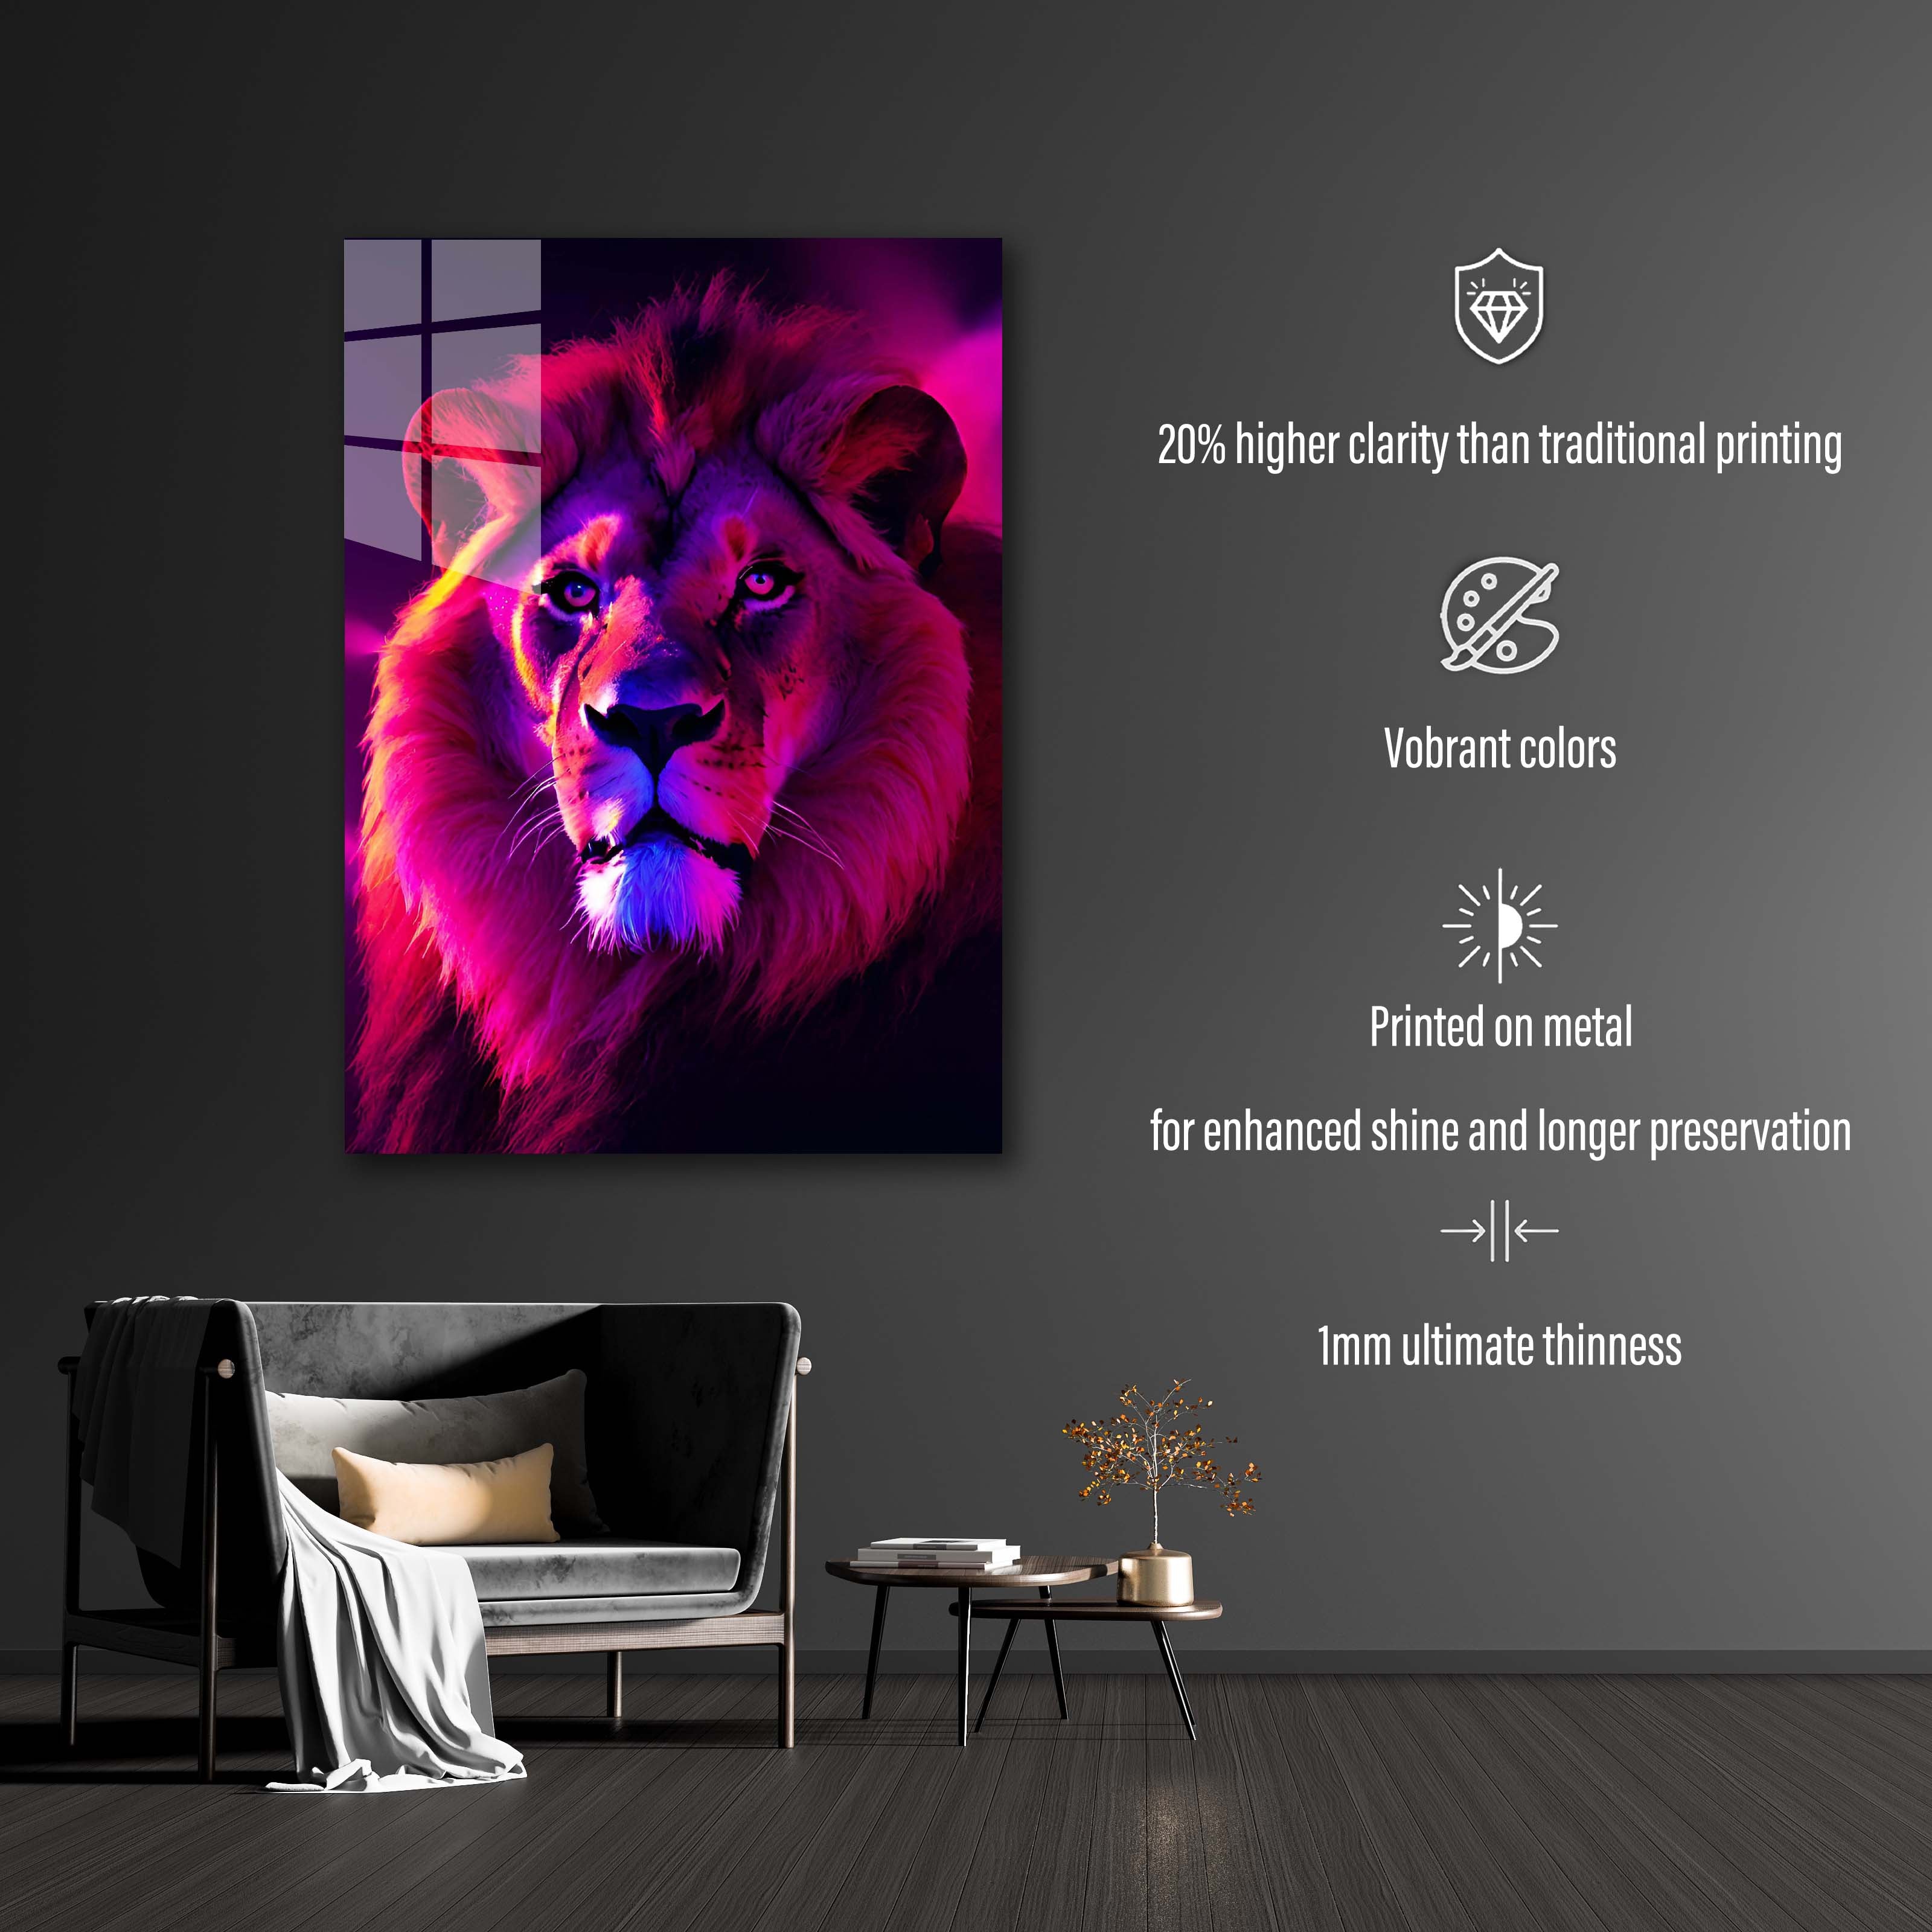 Lion King Of Jungle-designed by @DynCreative